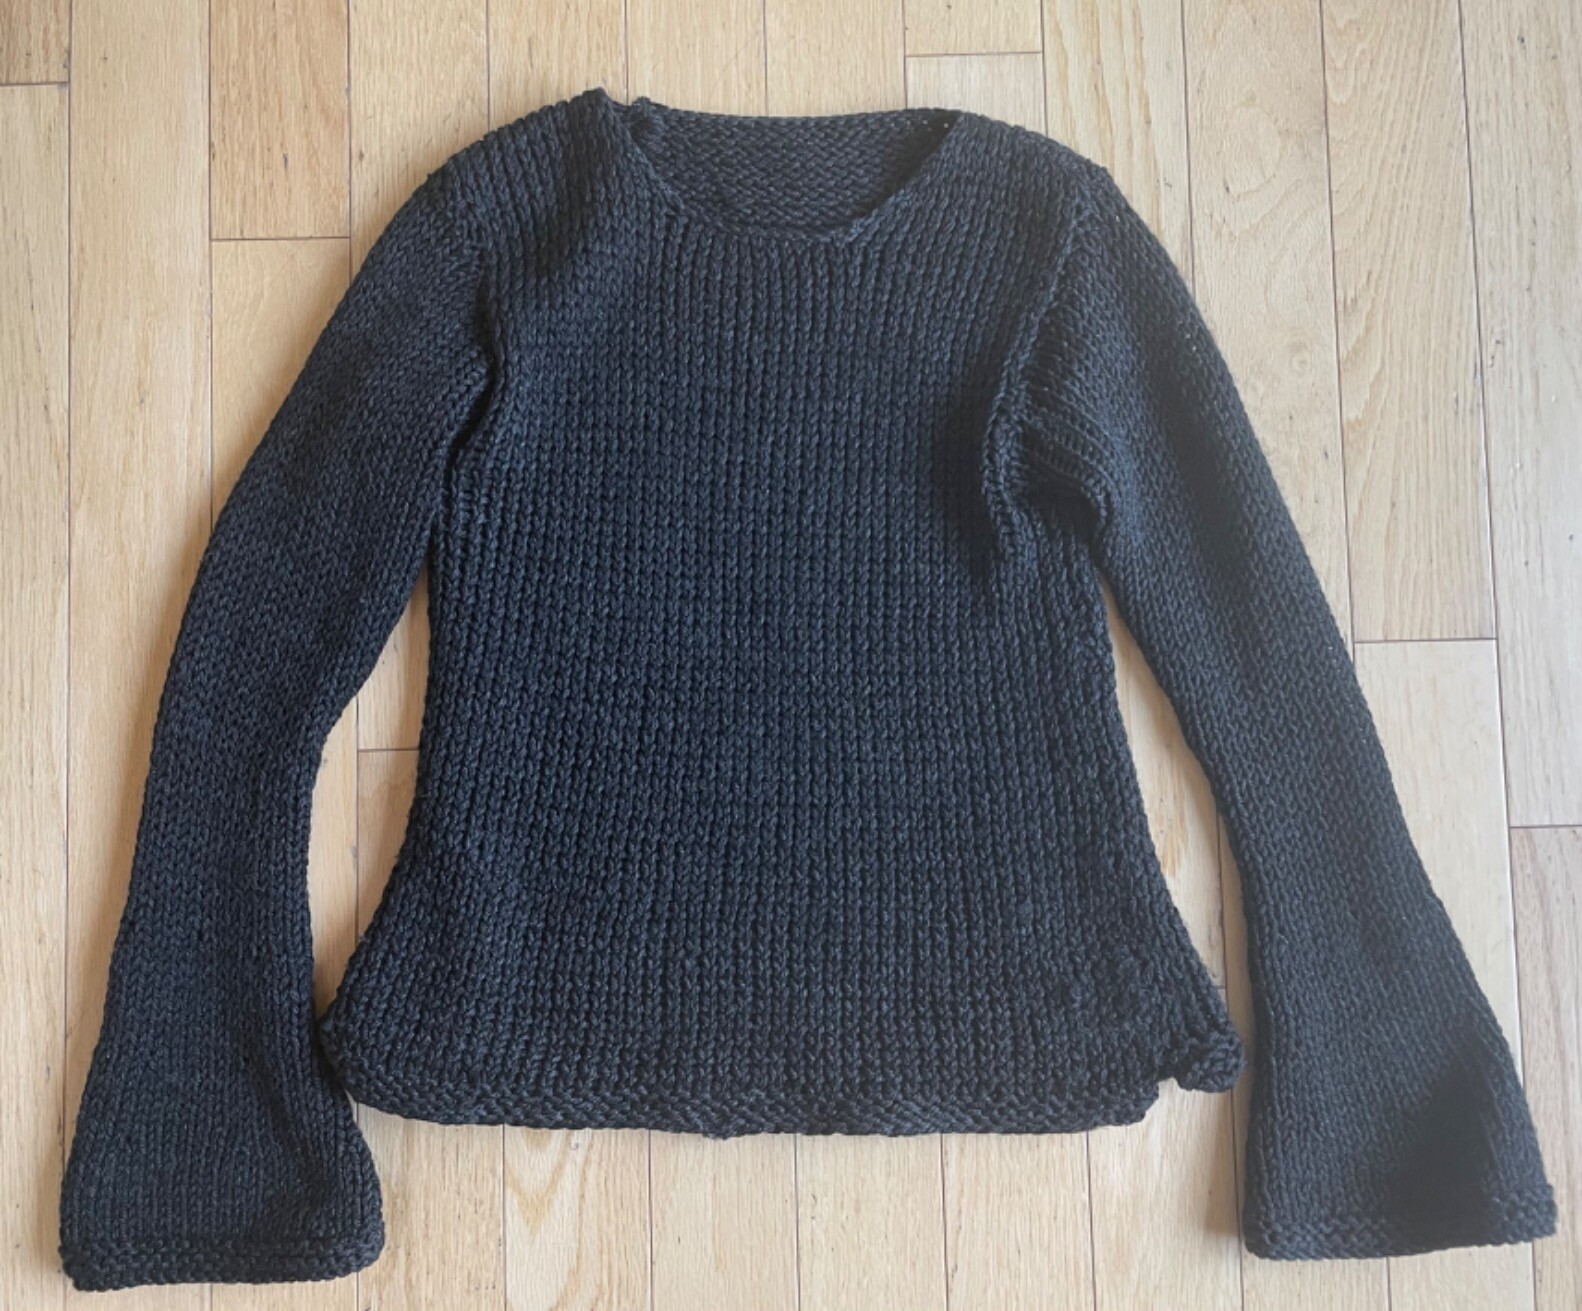 Photo of a hand knit black sweater lying on a light background